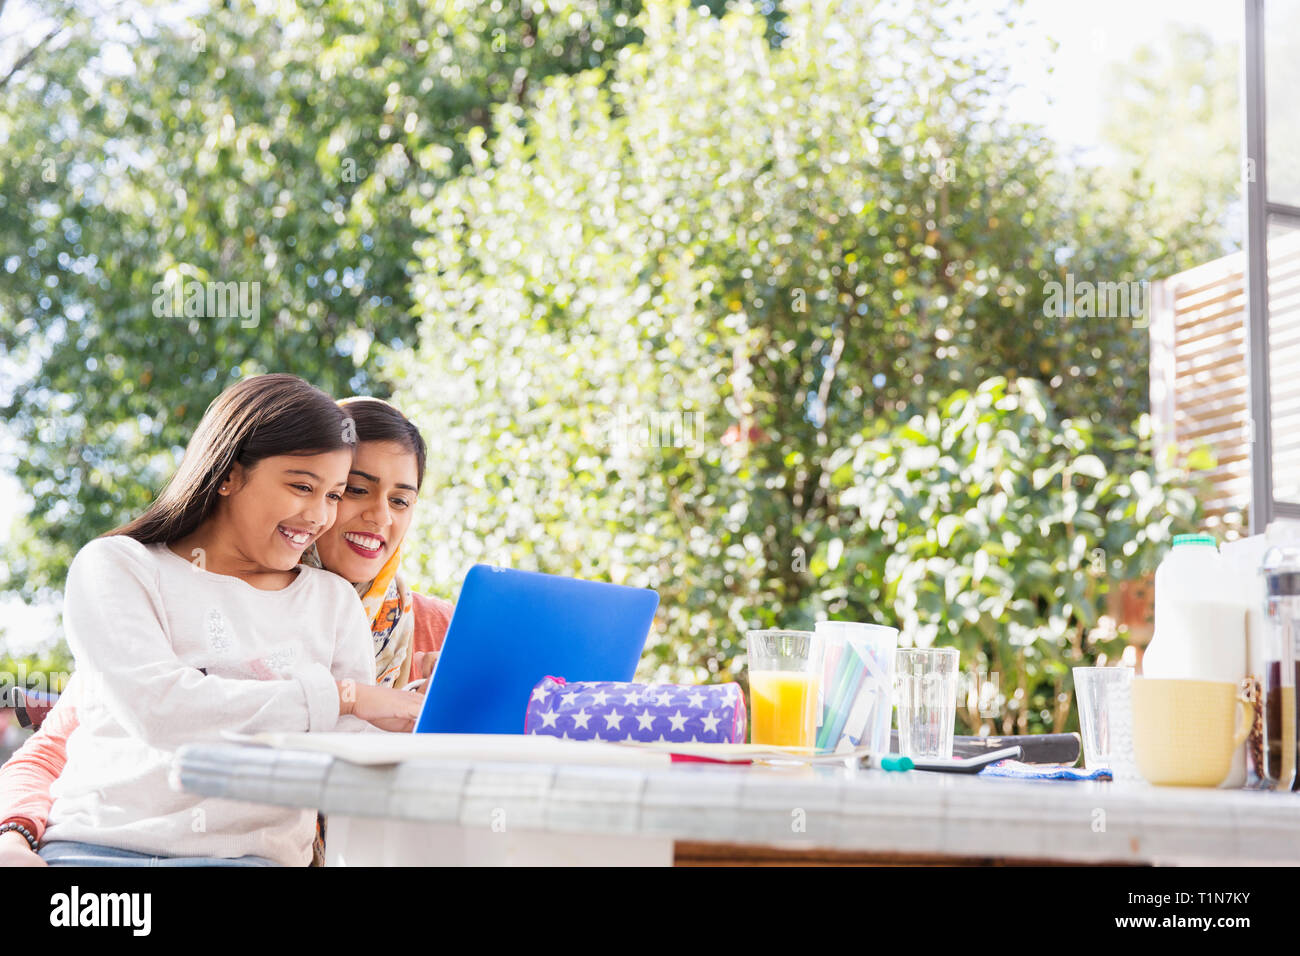 Smiling mother and daughter using laptop at table Stock Photo